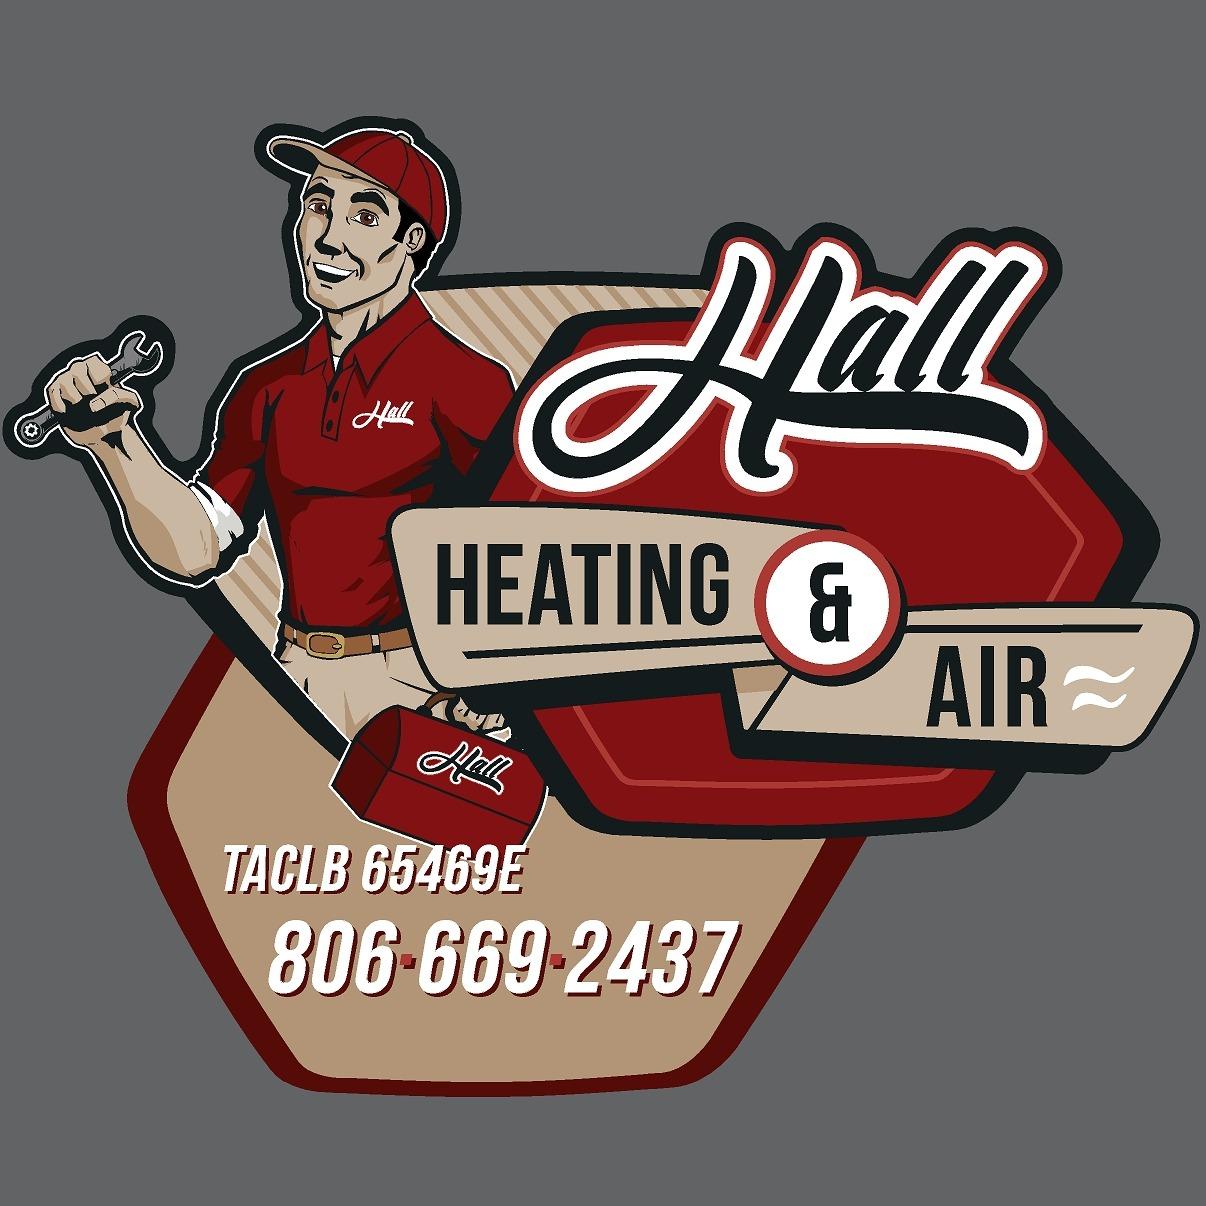 Hall Heating And Air